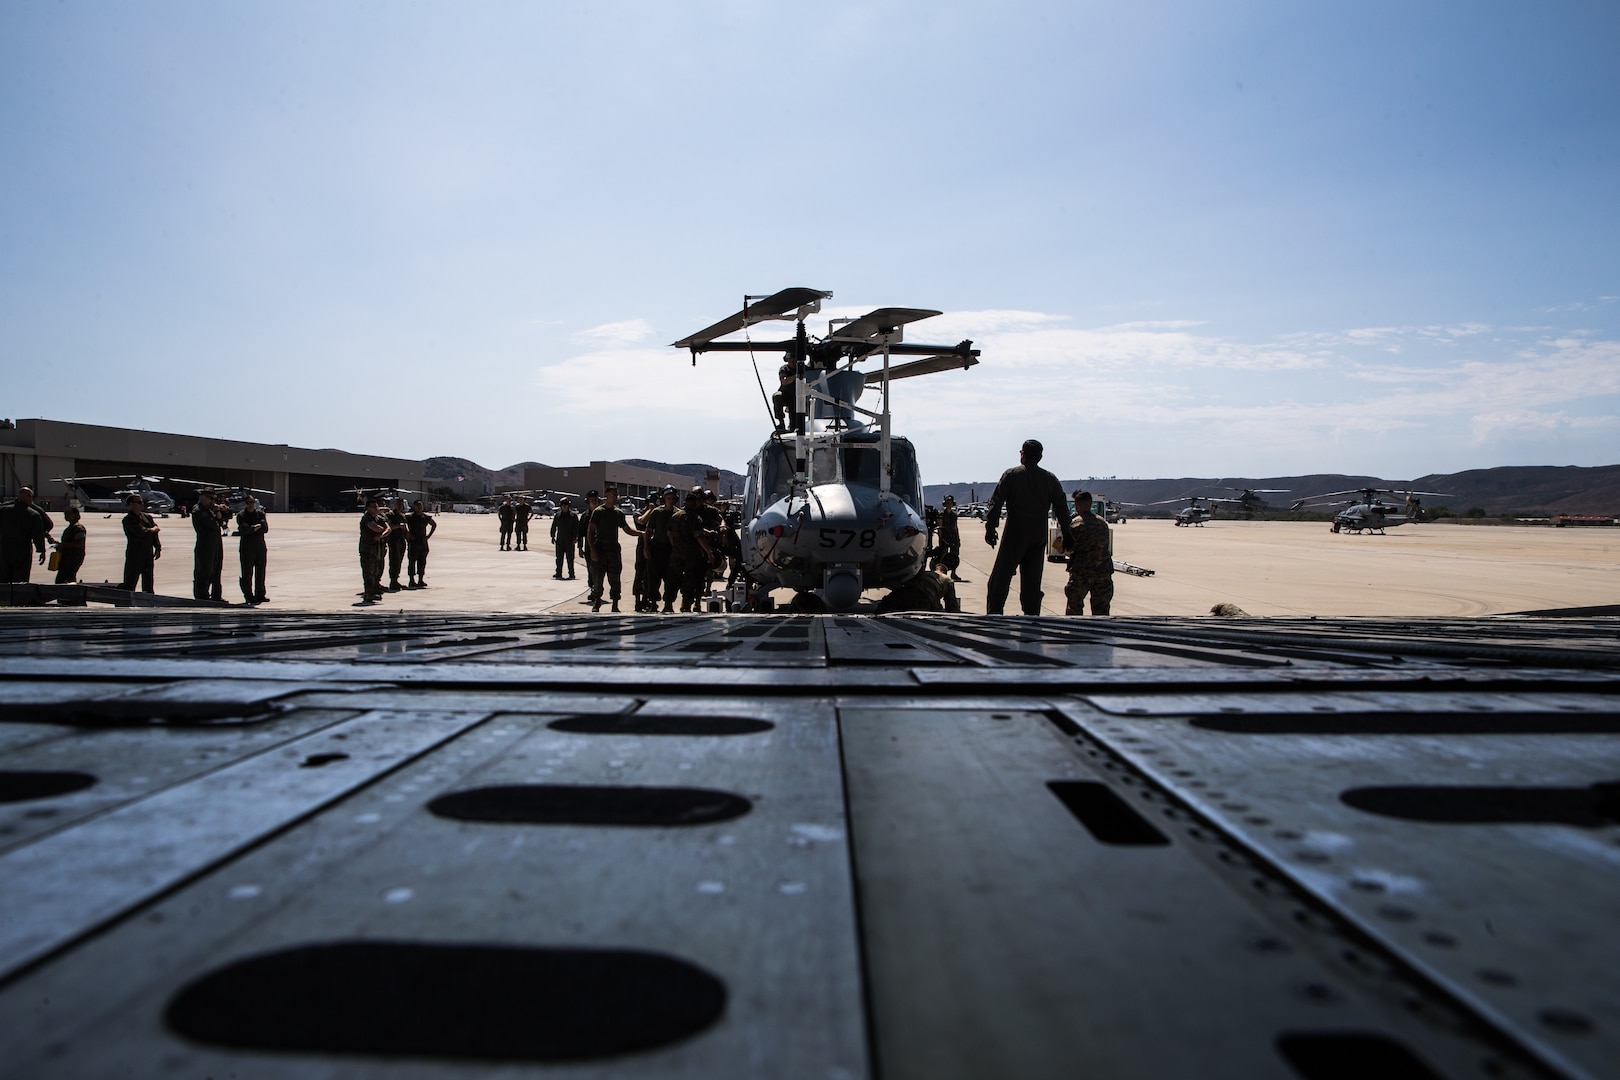 U.S. Marines and Airmen assist in loading a UH-1Y Venom into C-5M Super Galaxy at Marine Corps Air Station Camp Pendleton, California, Sept. 16. The C-5M was a visiting U.S. Air Force aircraft from 433rd Airlift Wing at Joint Base San Antonio-Lackland, Texas, and was here as part of a dual service training exercise.